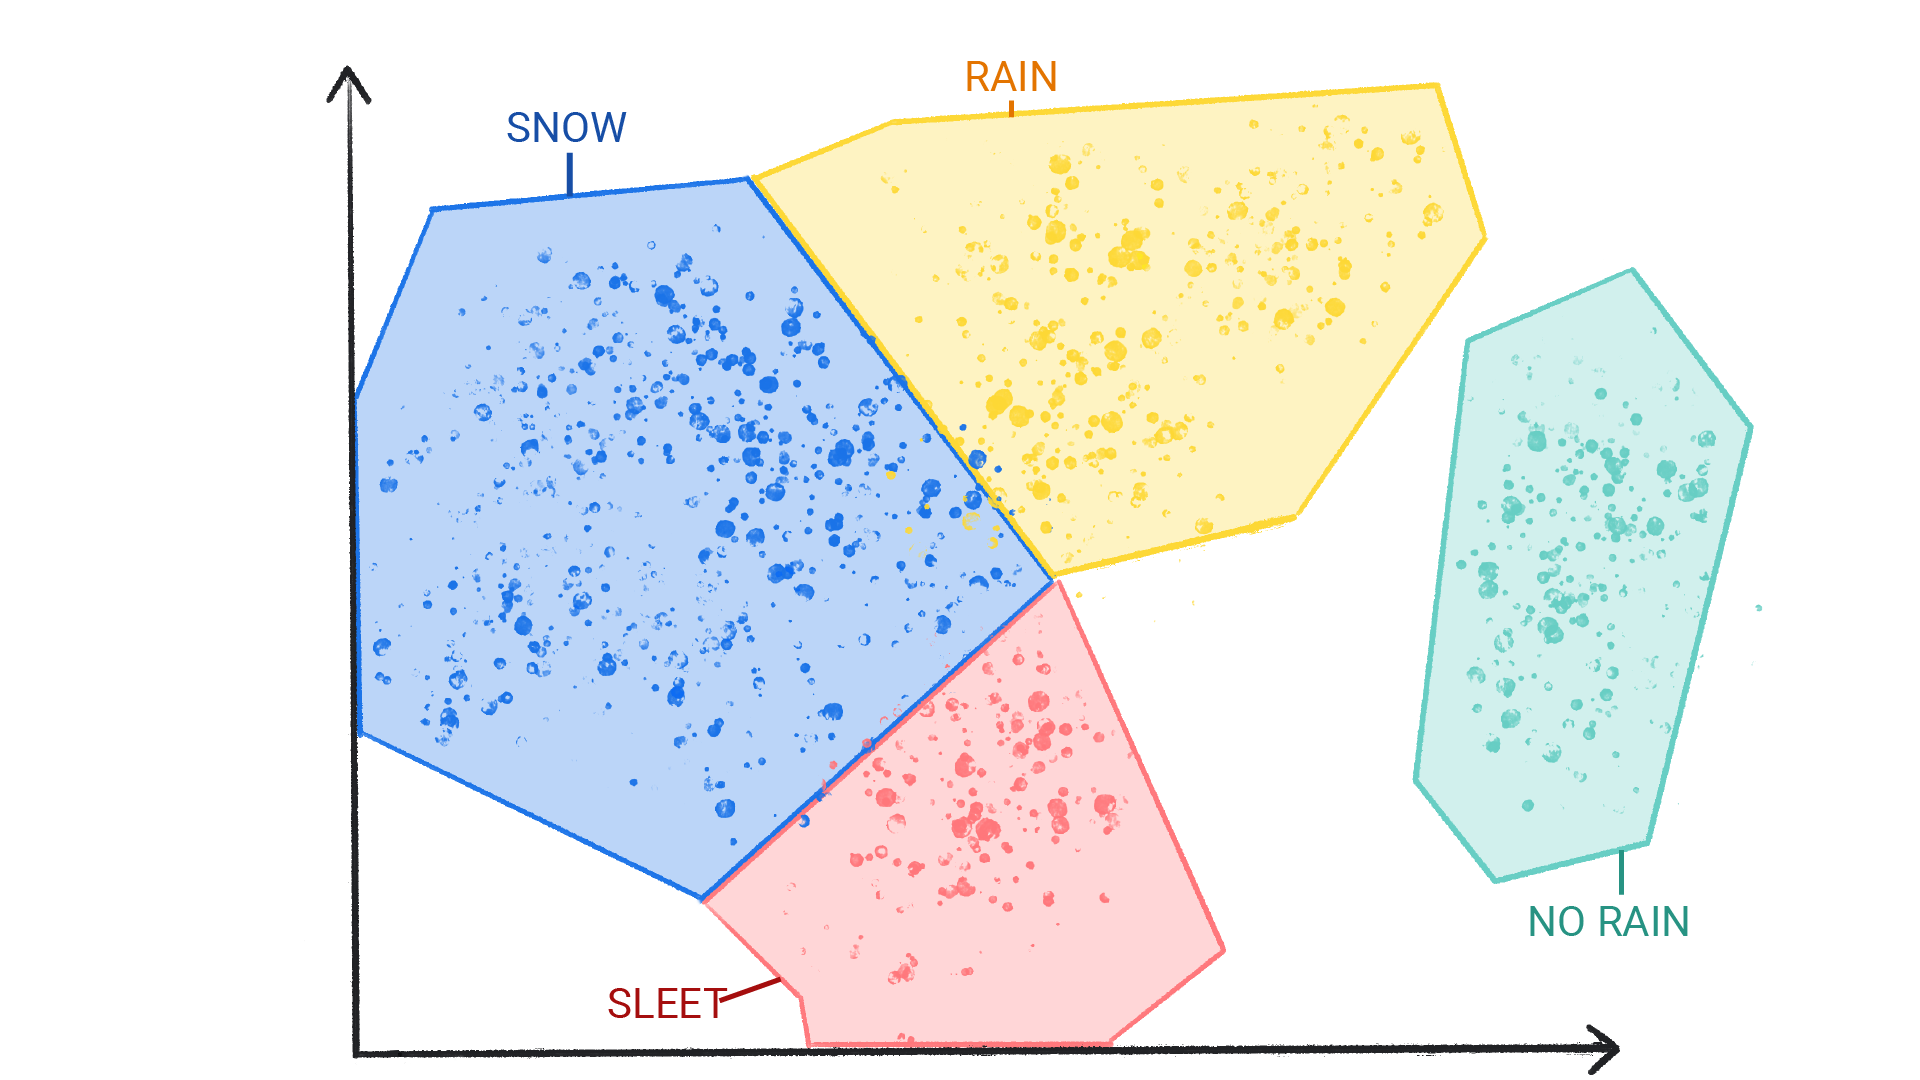 An image showing colored dots in clusters that are labeled as snow, rain, hail, and no rain that are enclosed in a shape and border each other.